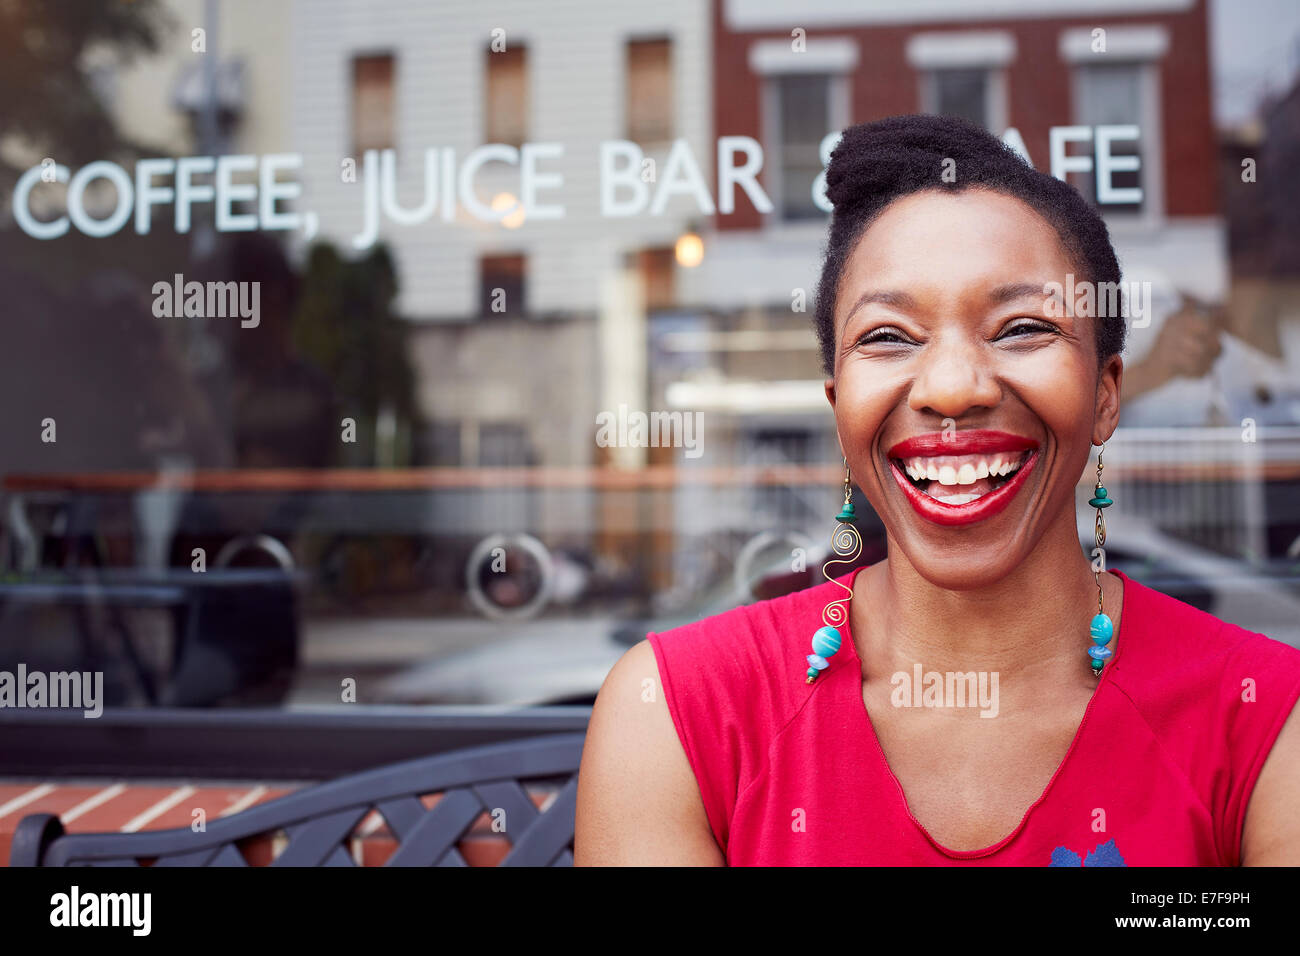 Woman laughing outside coffee shop on city street Stock Photo